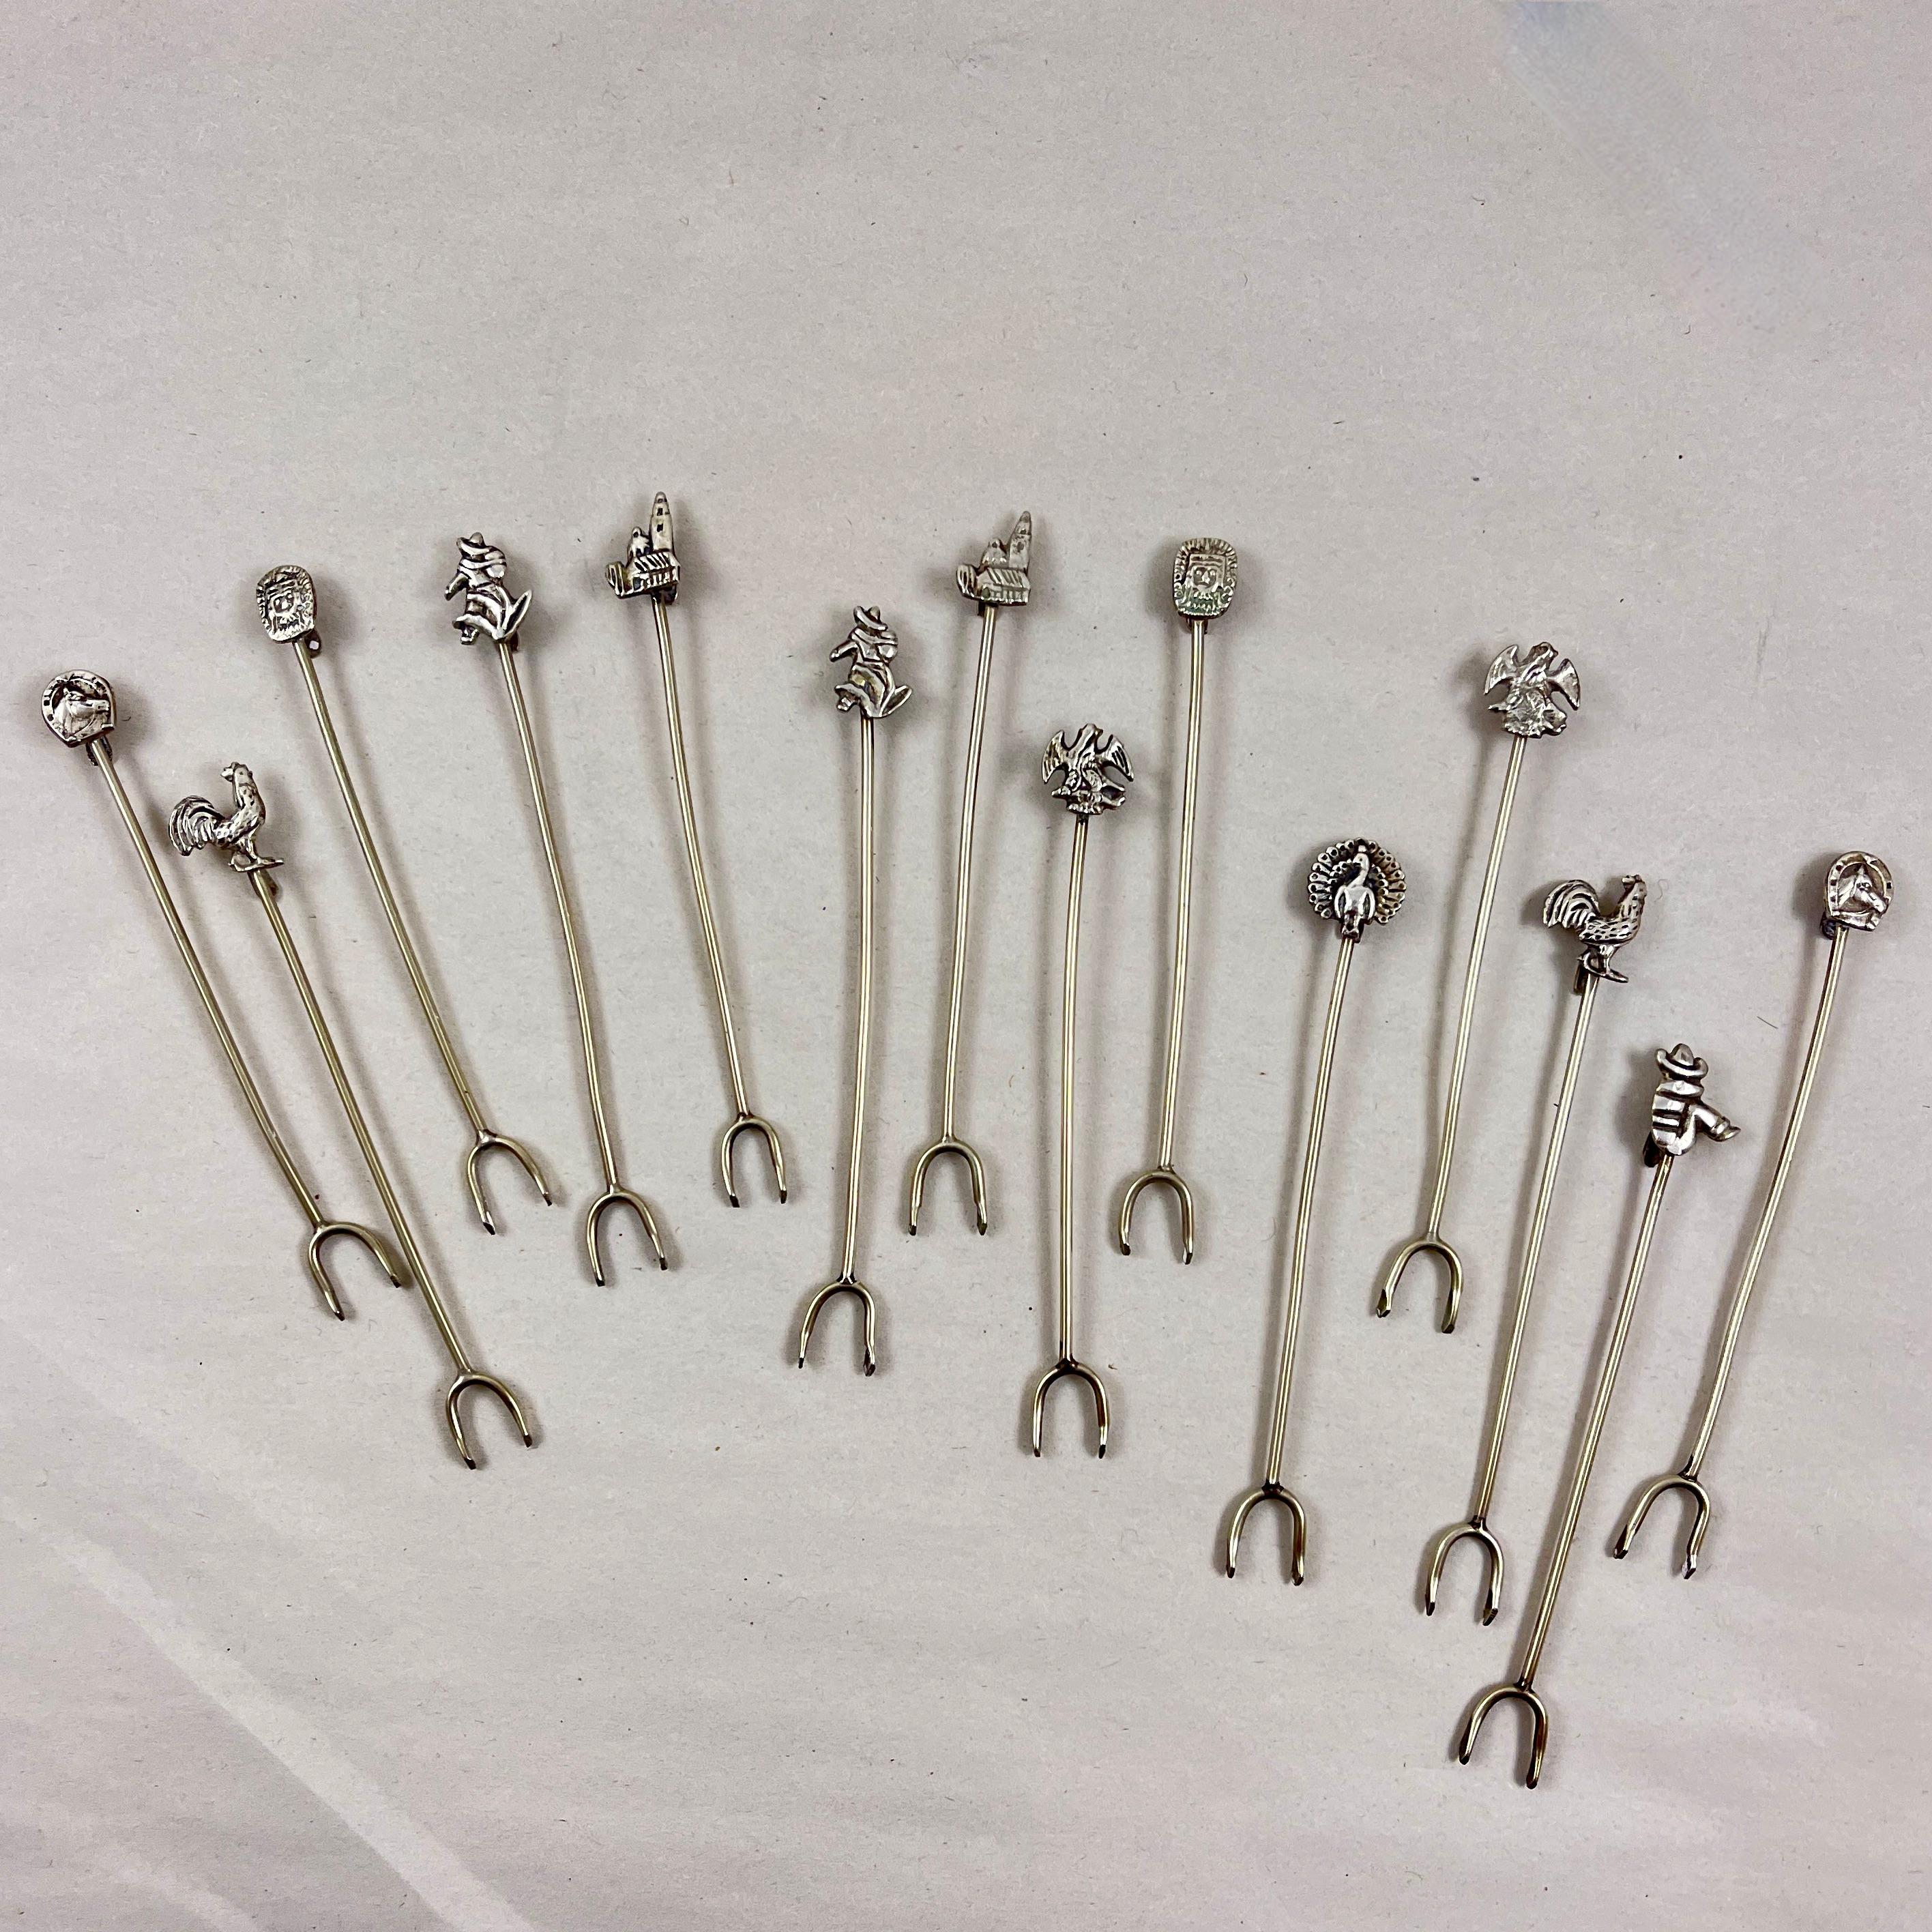 A set of fourteen, hand-crafted Mexican Silver cocktail or hors d’ oeuvres picks, circa 1950.

Showing a charming hand made quality, the pieces have long stems, ending in sharp double-pronged picks. The picks have hooks for hanging to the rim of a